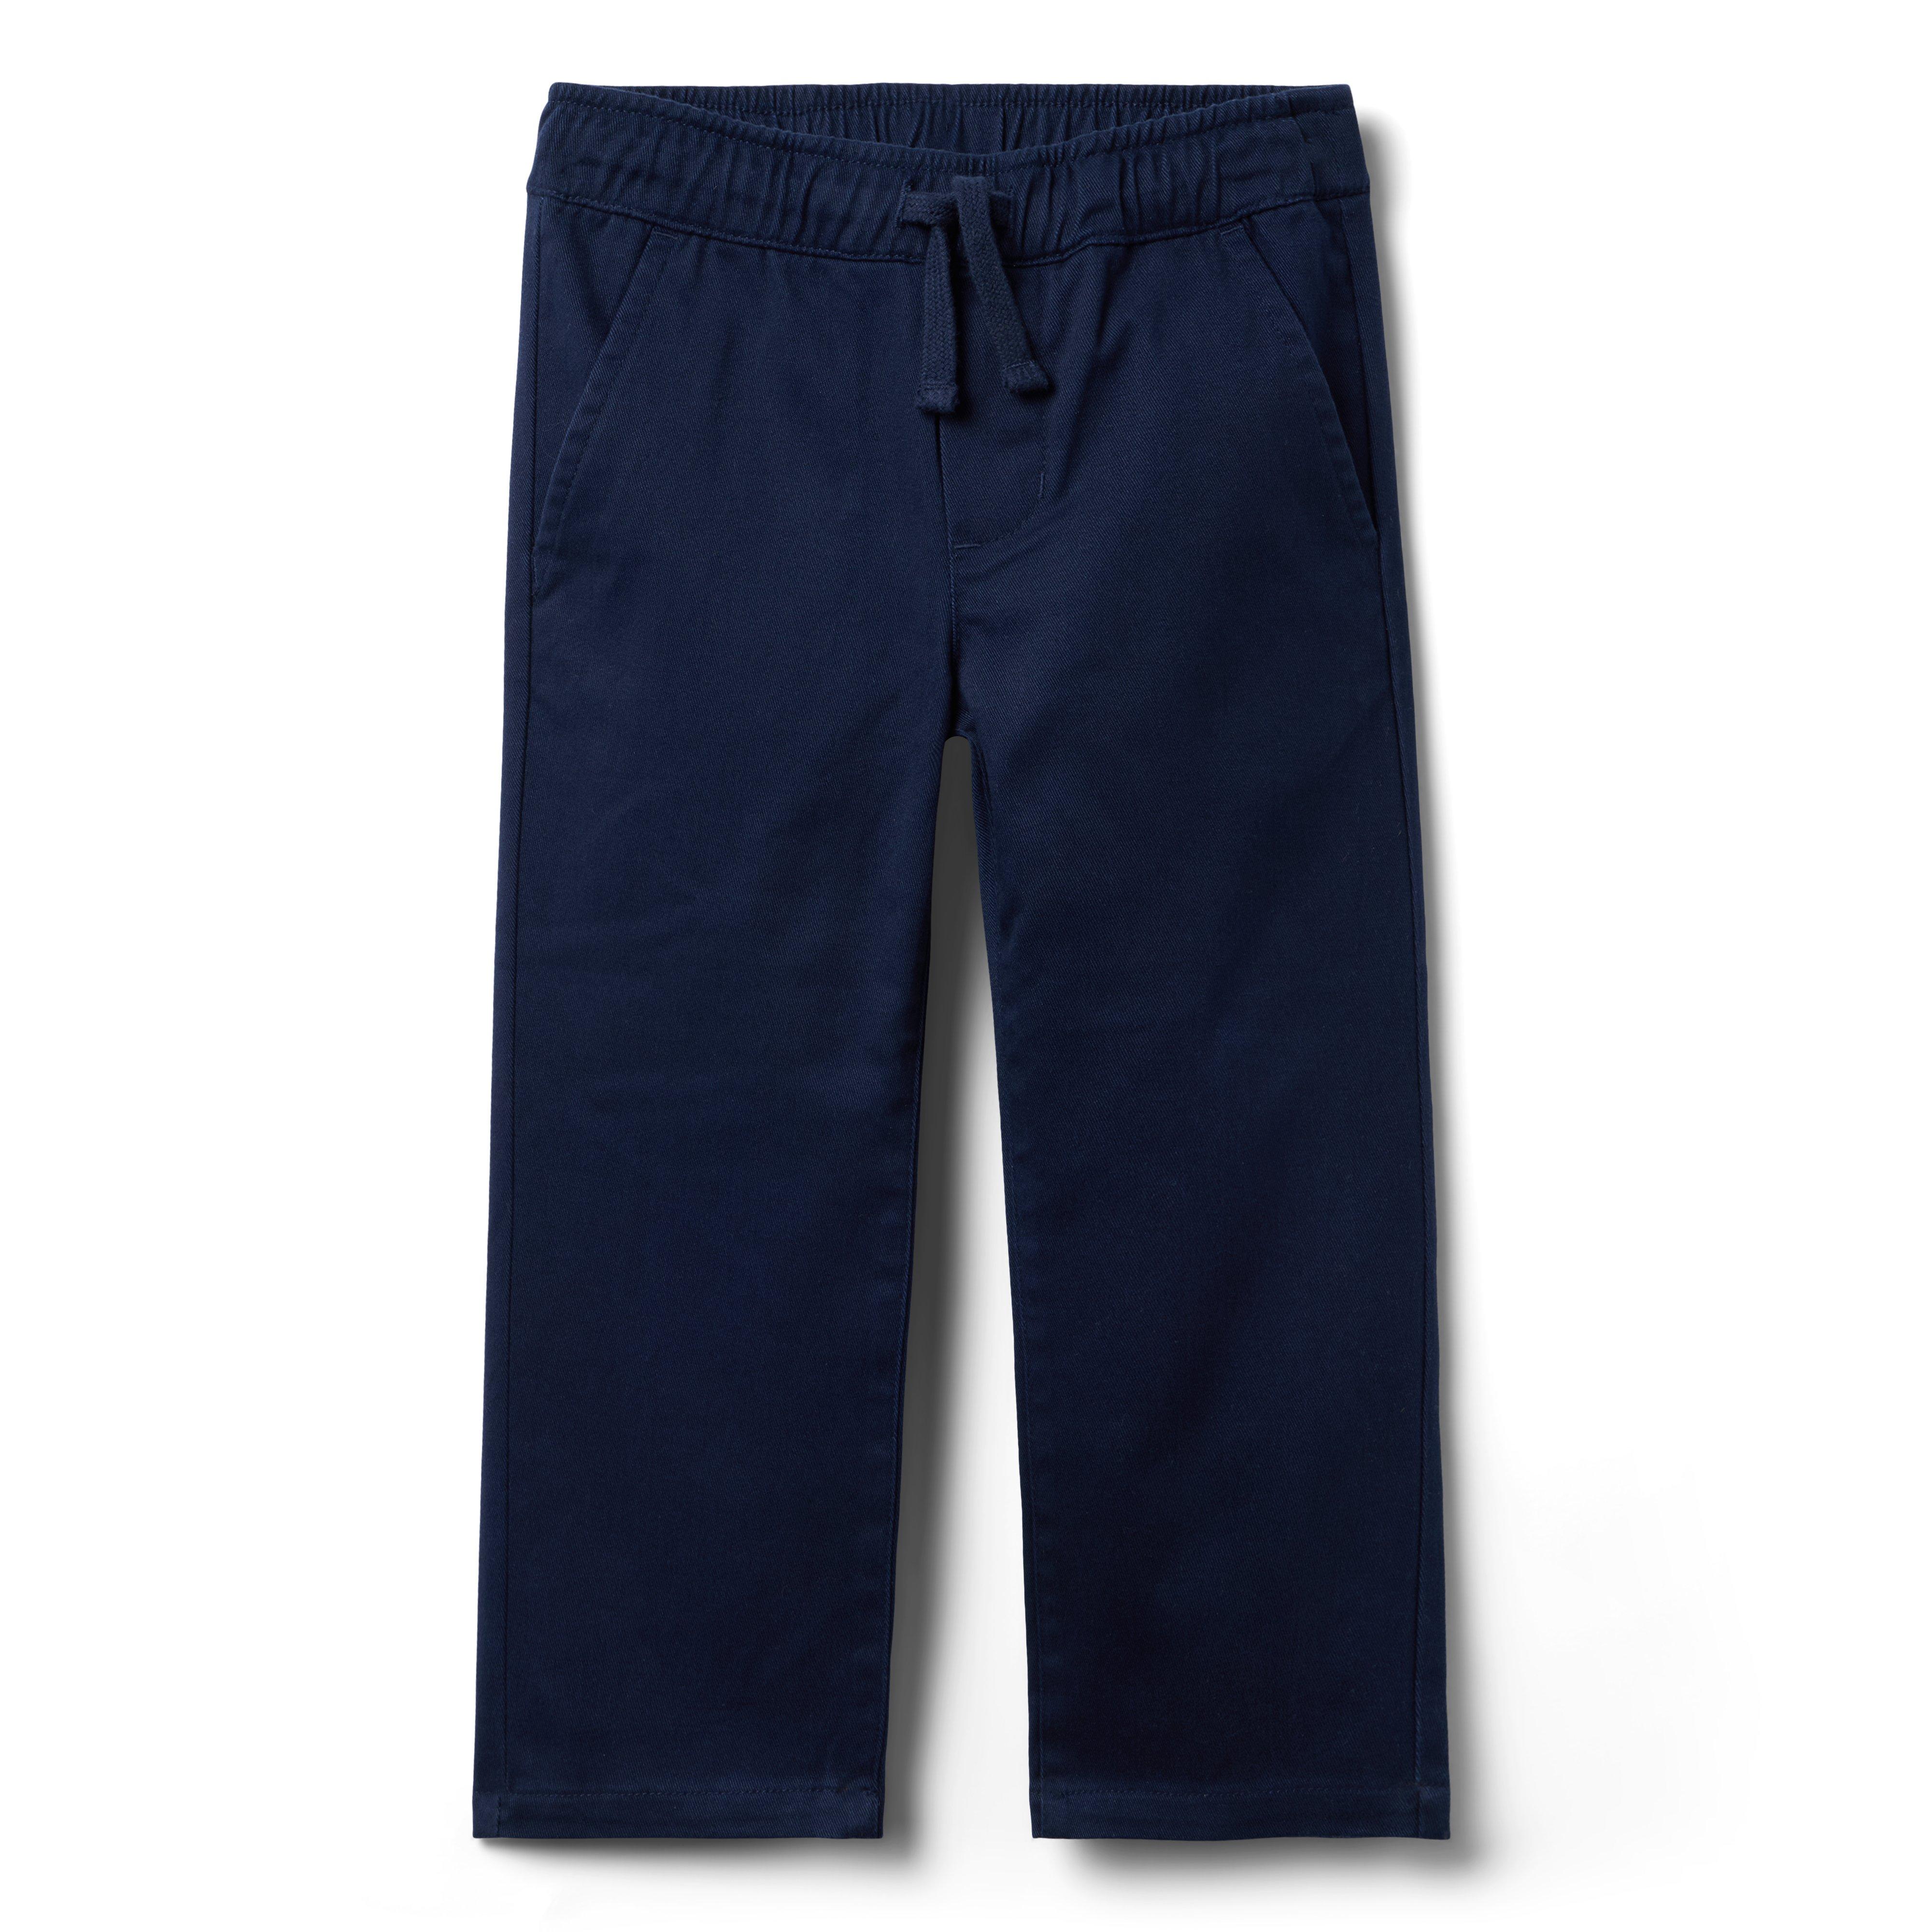 The Twill Pull-On Pant